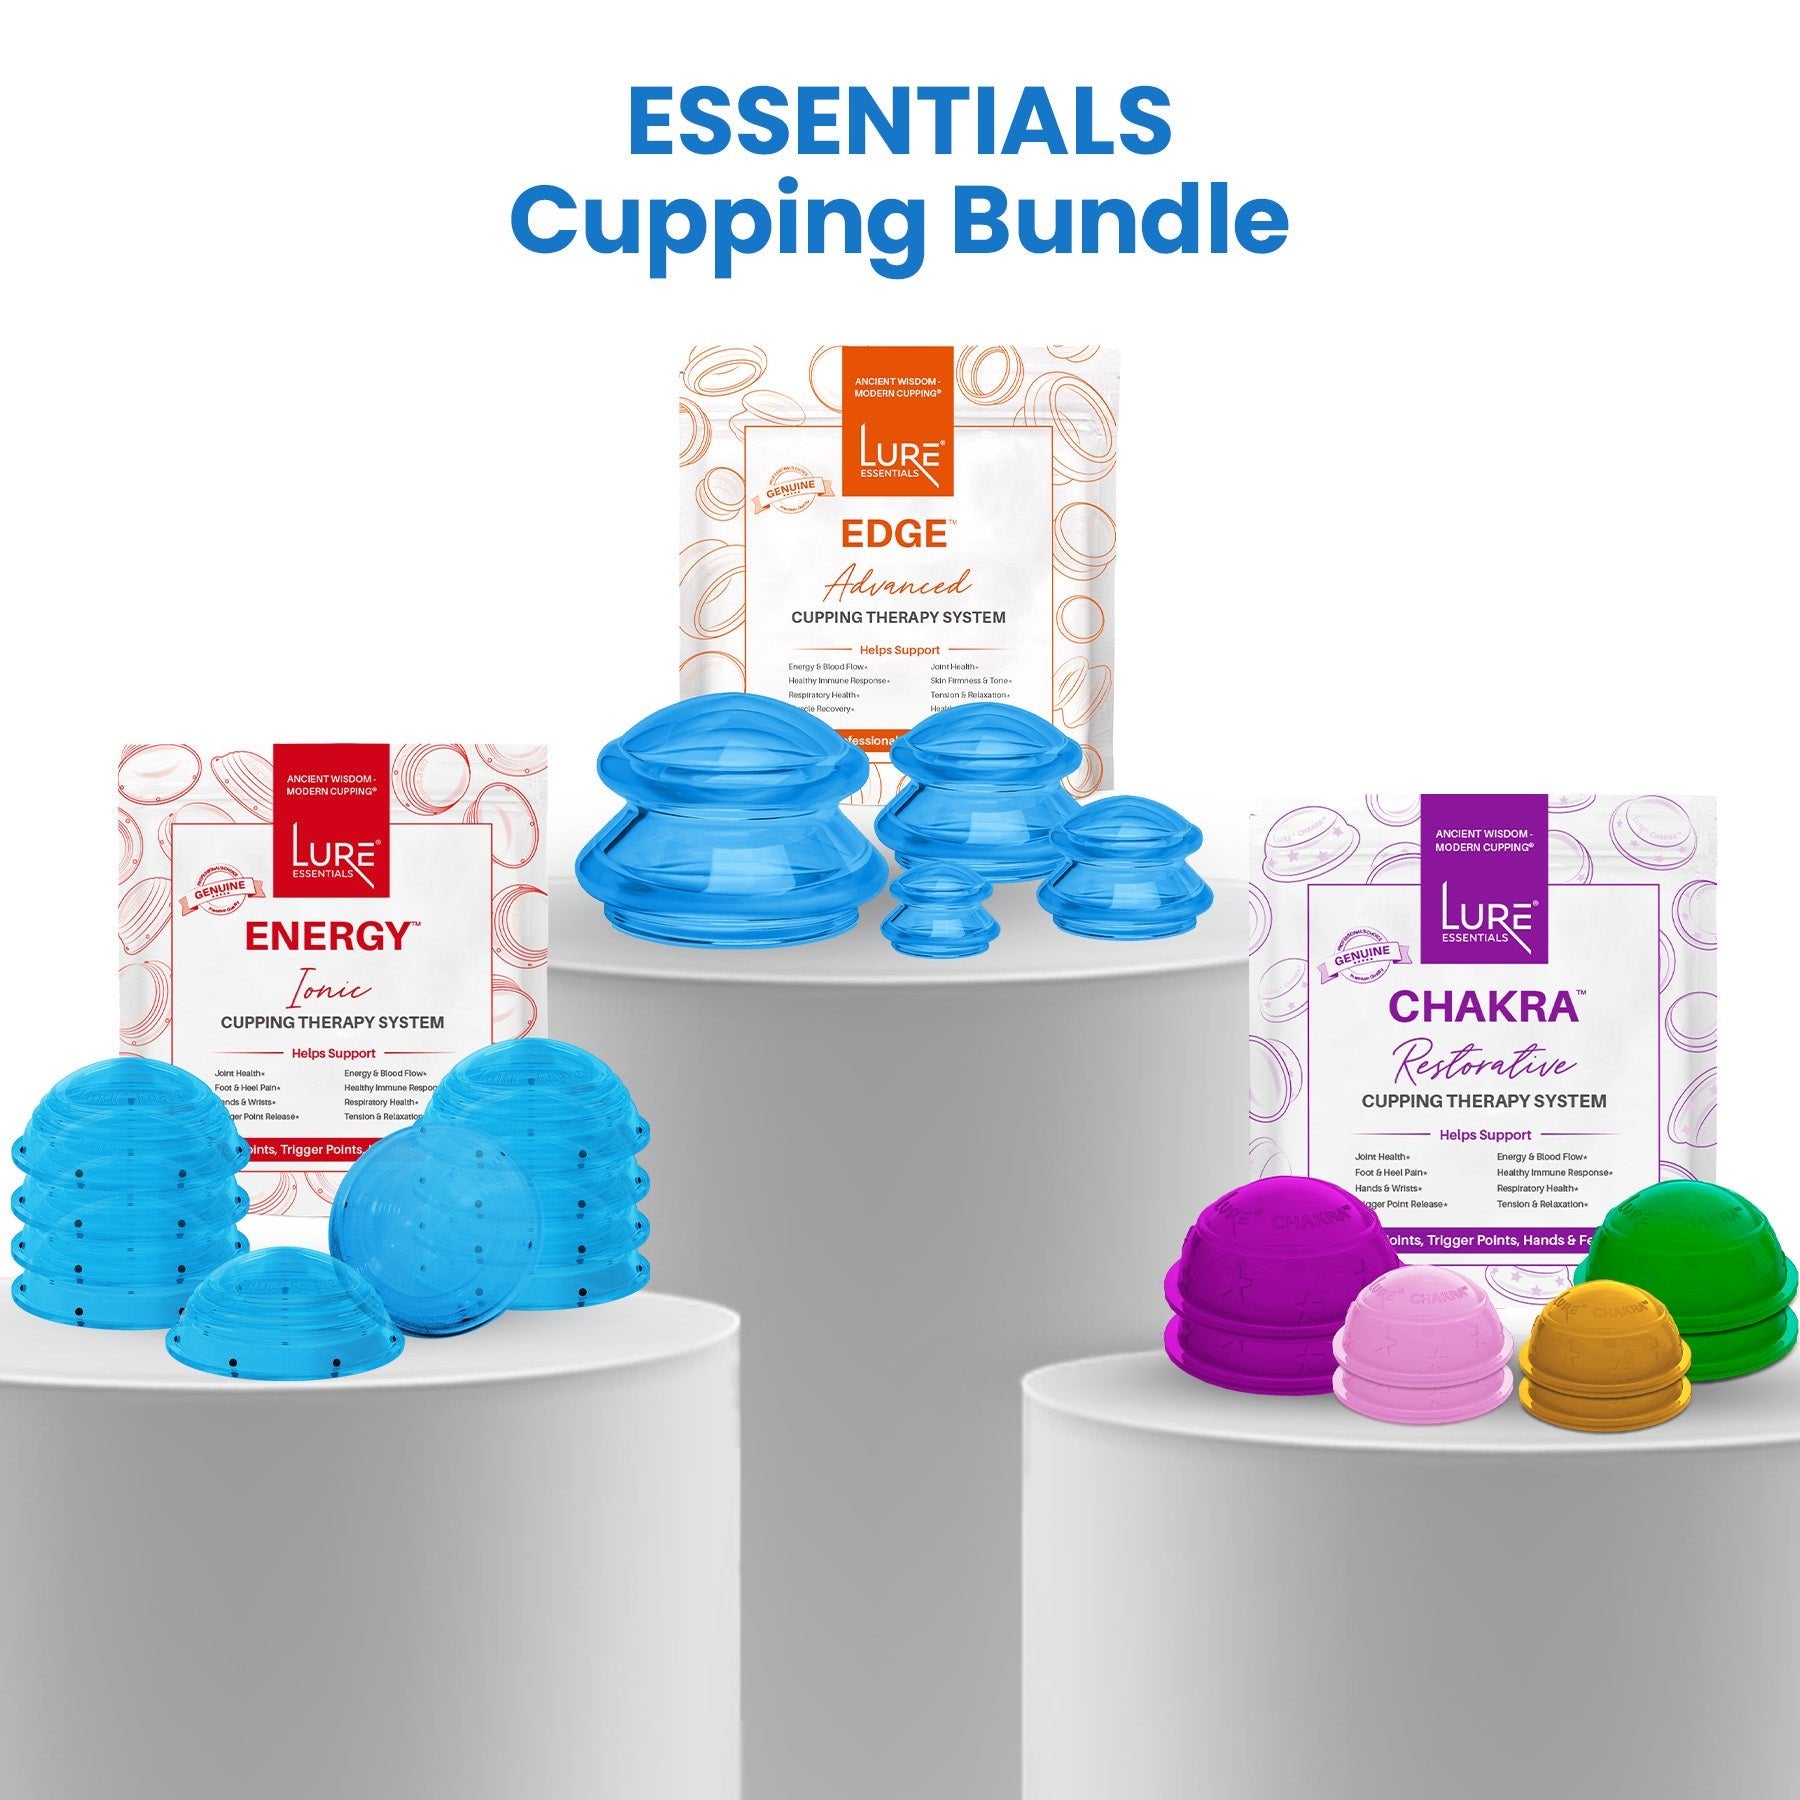 The ESSENTIALS Cupping Sets Bundle